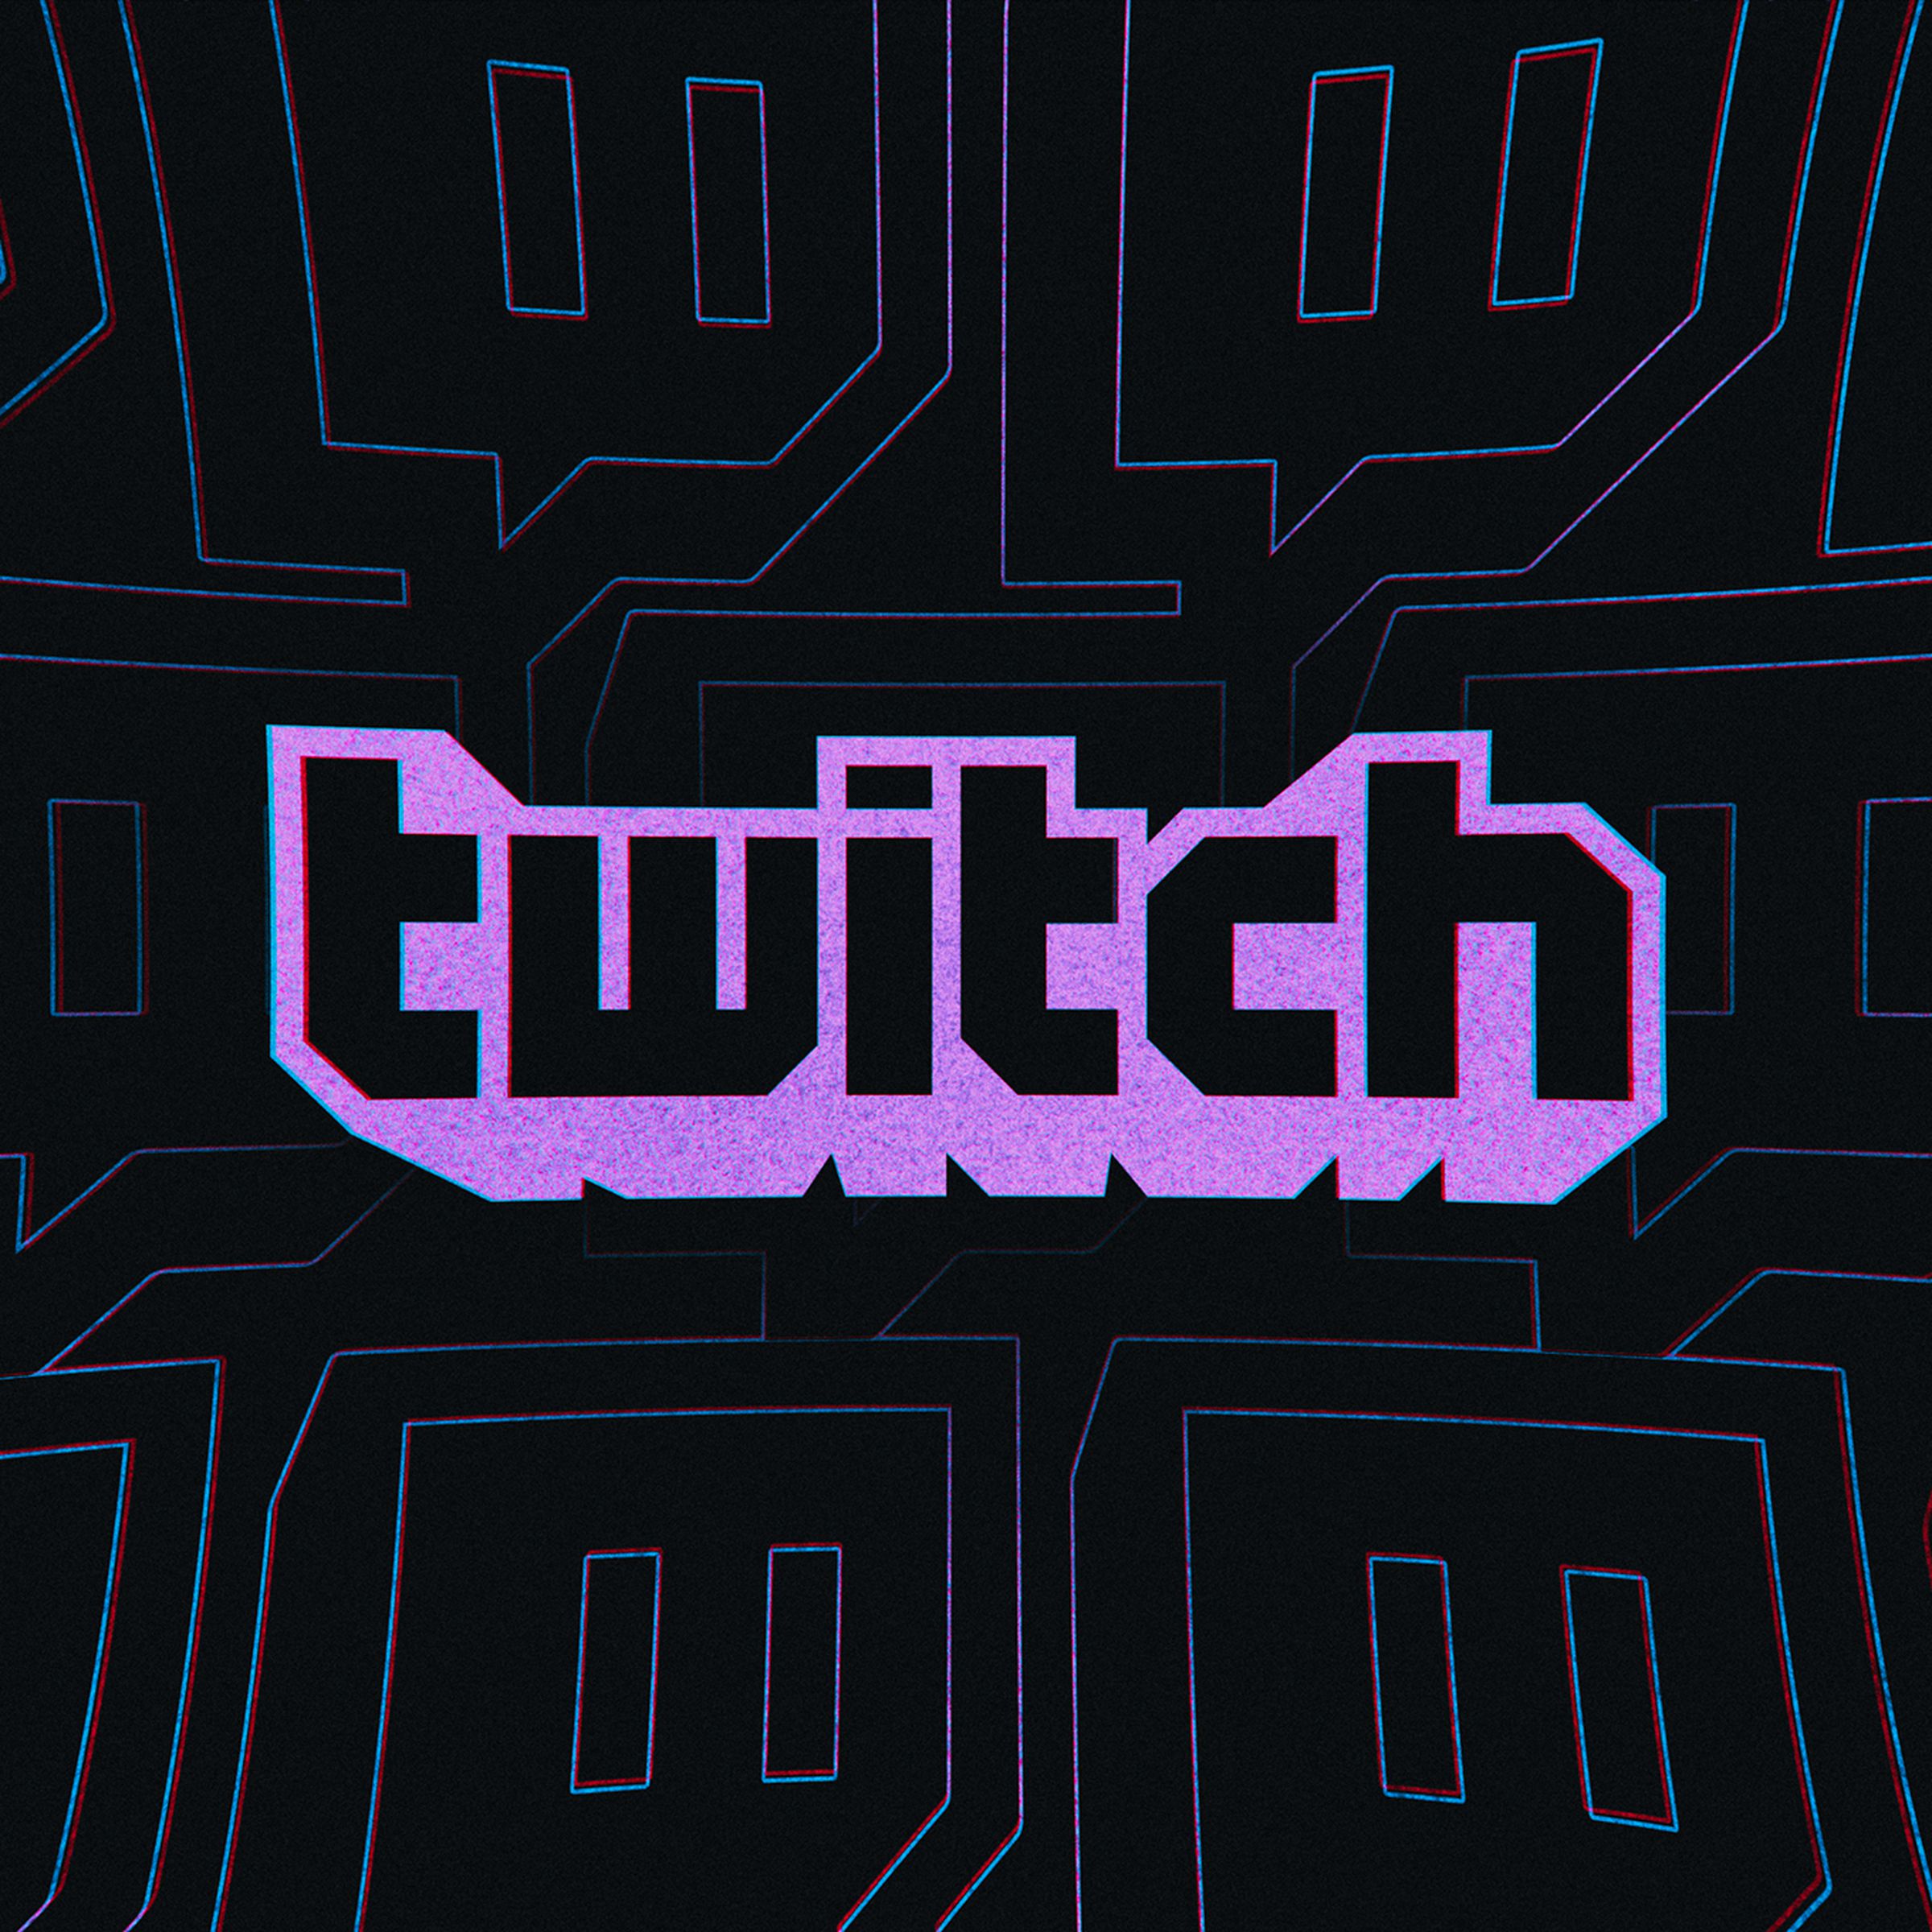 An illustration of the Twitch logo